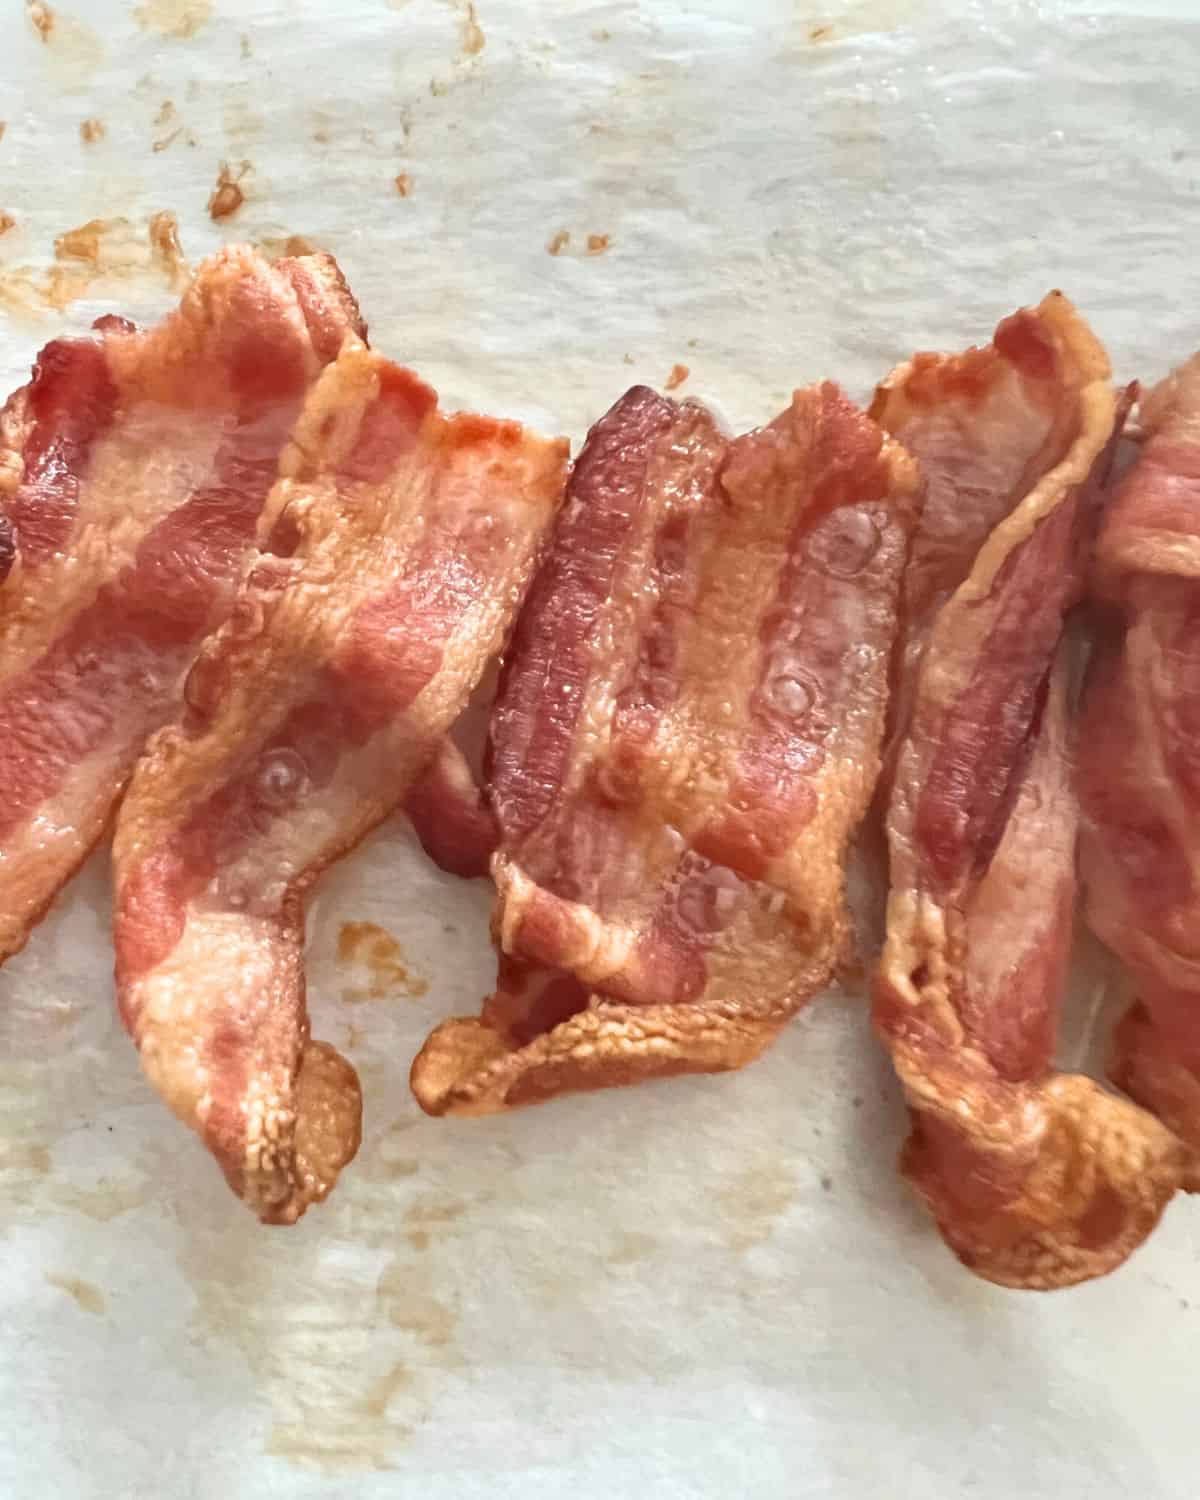 Crispy air fried bacon ready for sandwiches or pizza toppings. 